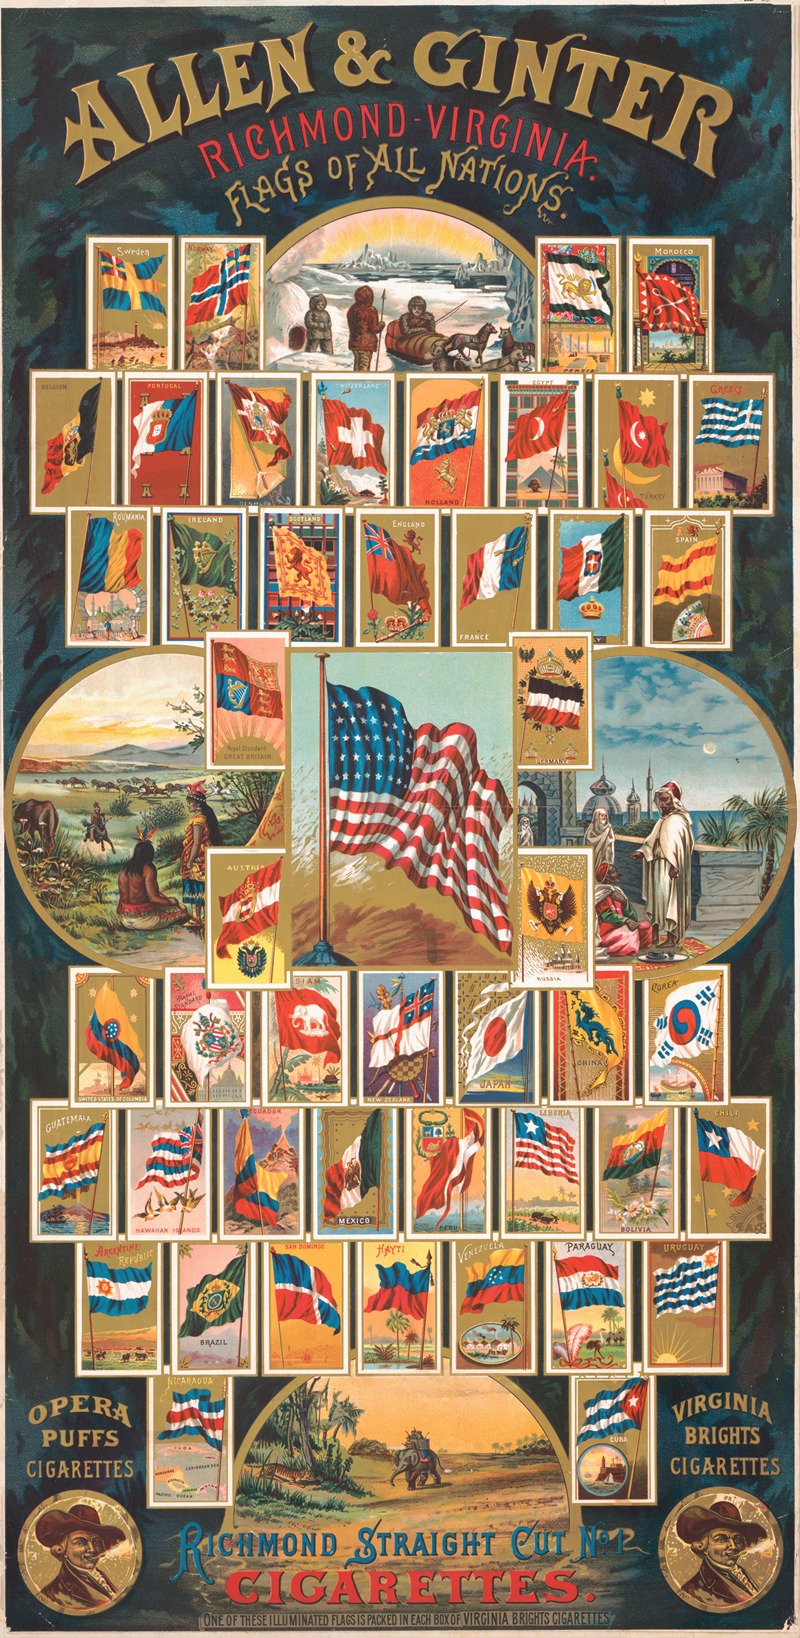 Geo. S. Harris & Sons - Allen & Ginter, Richmond-Virginia, flags of all nations